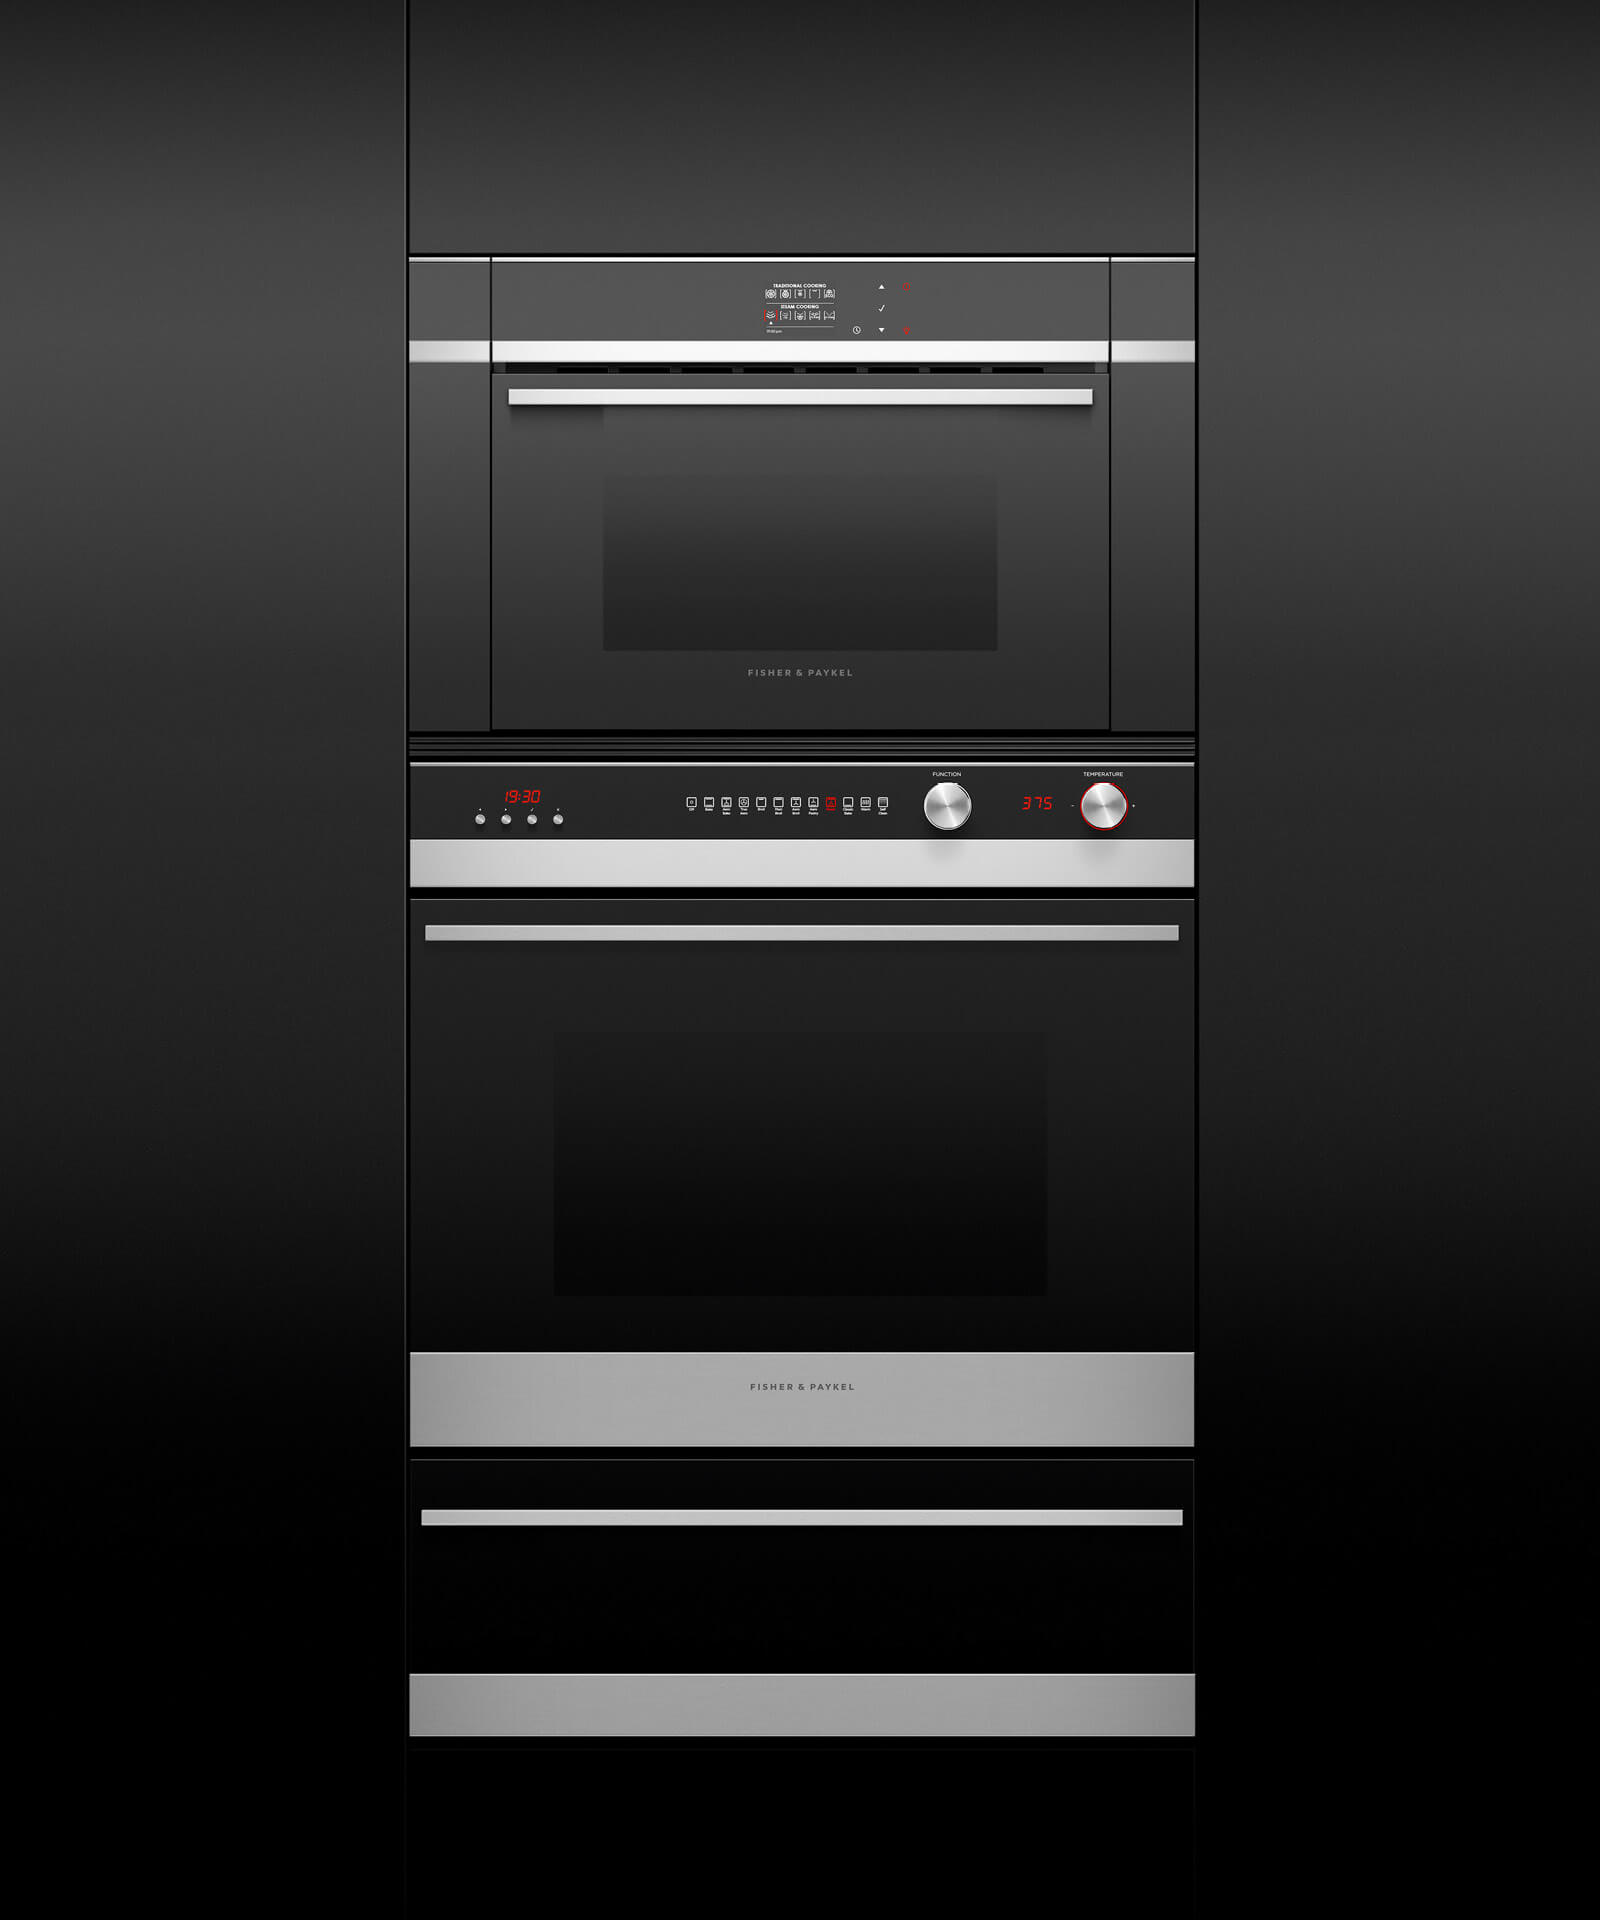 Oven, 30", 11 Function, Self-cleaning, pdp